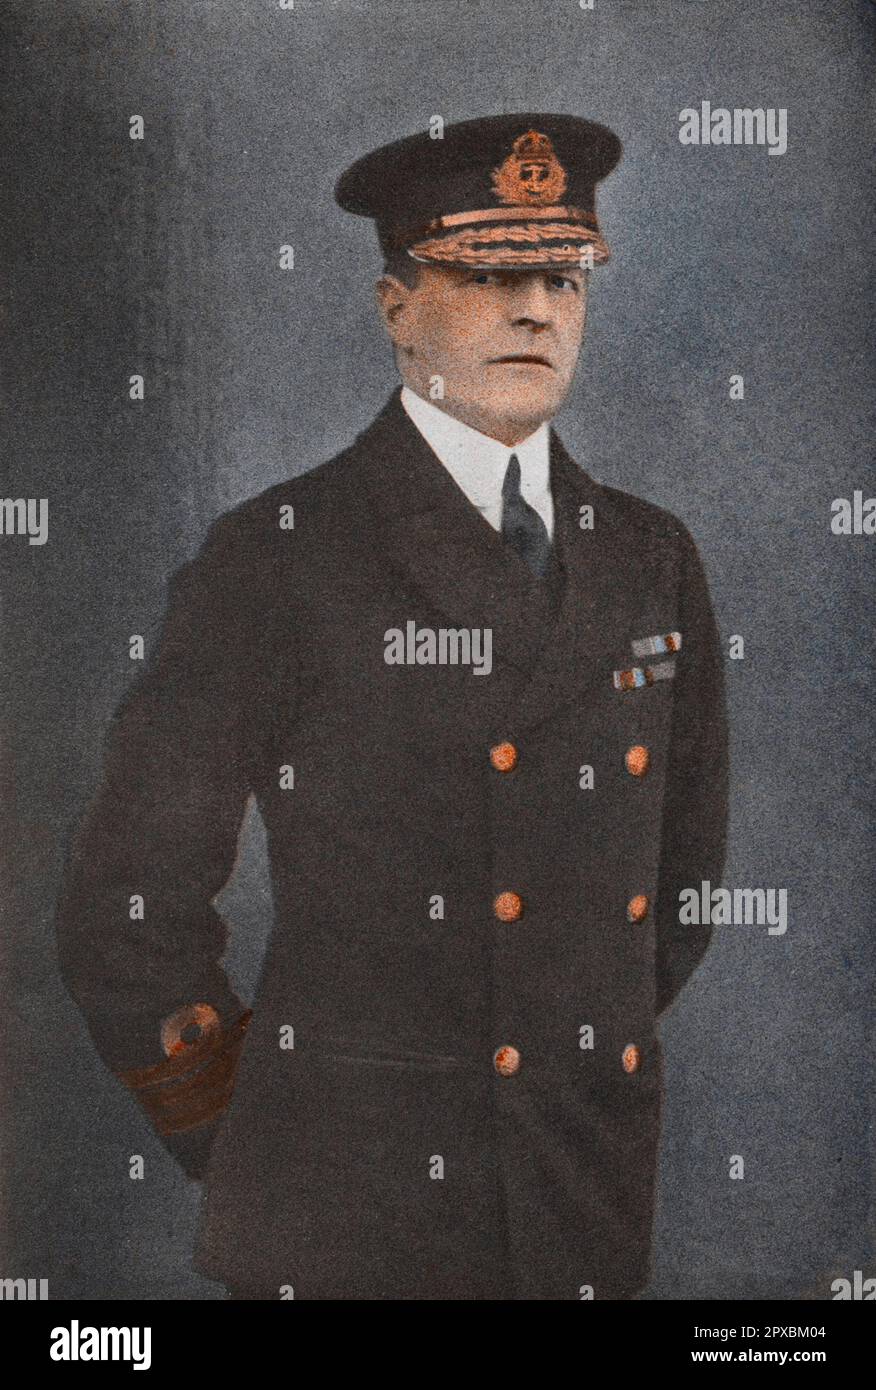 Admiral Beatty. Admiral of the Fleet David Richard Beatty, 1st Earl Beatty (1871 – 1936) was a Royal Navy officer. After serving in the Mahdist War and then the response to the Boxer Rebellion, he commanded the 1st Battlecruiser Squadron at the Battle of Jutland in 1916. Later in the war he succeeded Jellicoe as Commander in Chief of the Grand Fleet, in which capacity he received the surrender of the German High Seas Fleet at the end of the war. Stock Photo